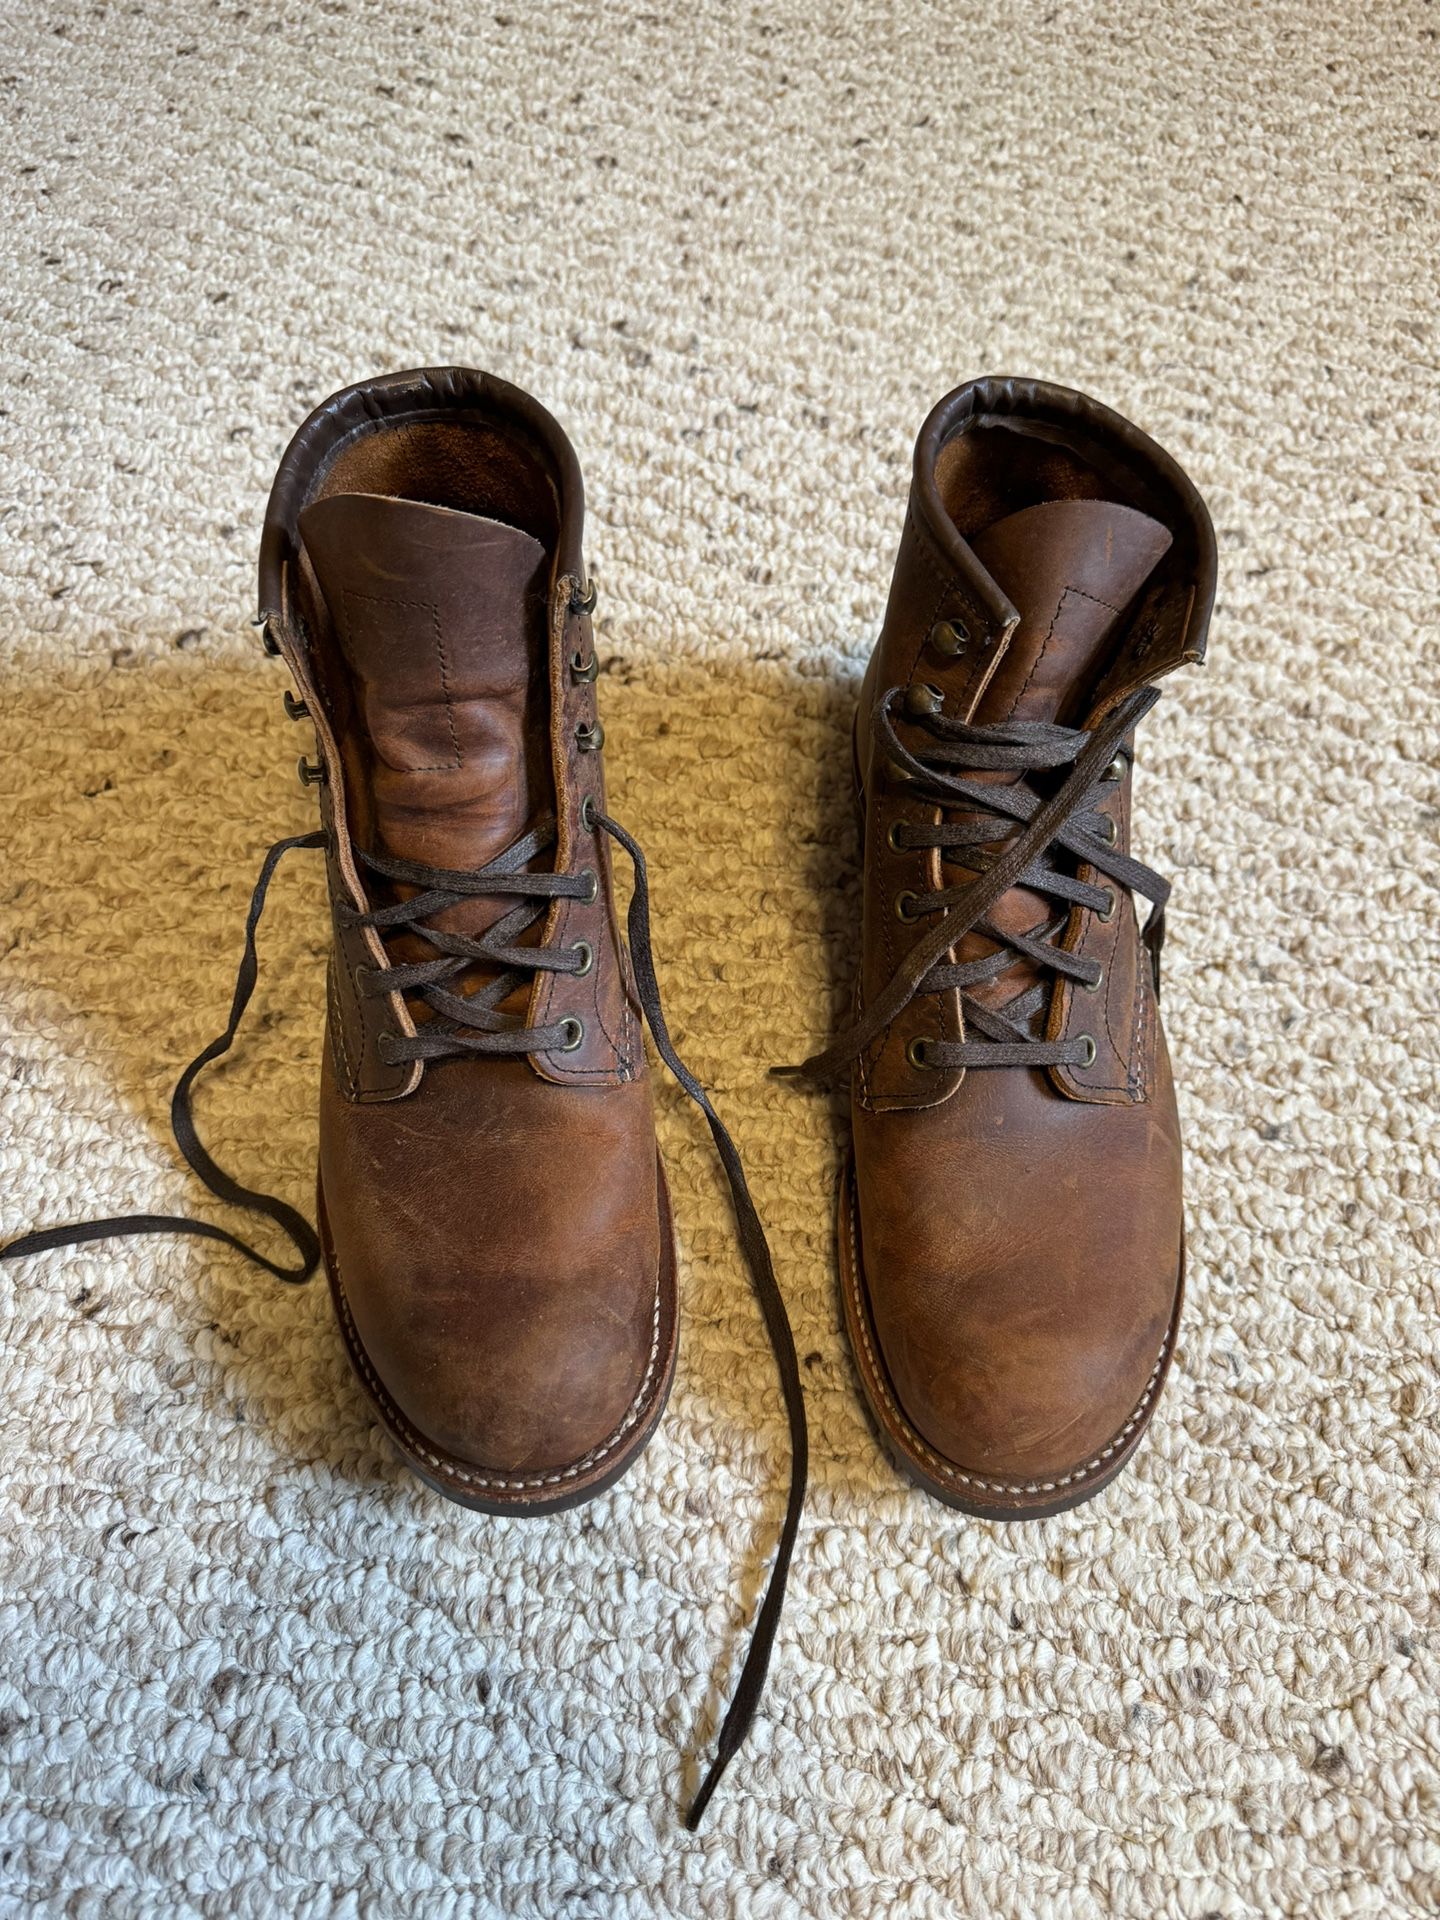 Men’s Red Wing Boots Size 8.5D